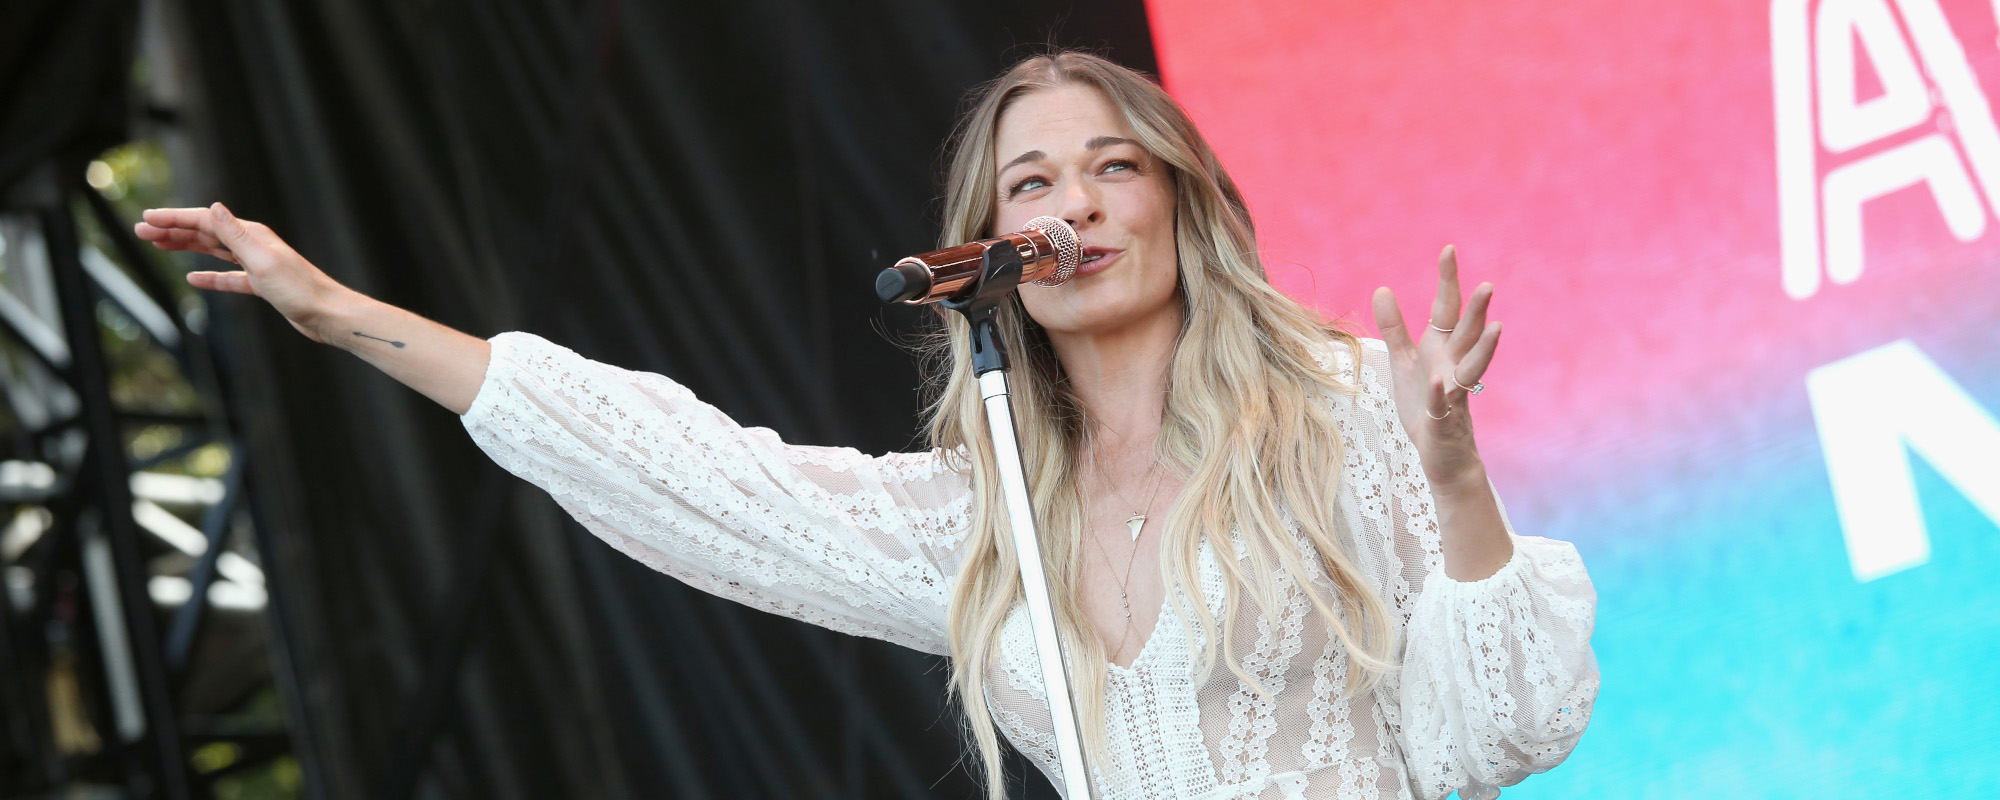 LeAnn Rimes Gives Fans an Early Christmas Gift: A Holiday Tour in December